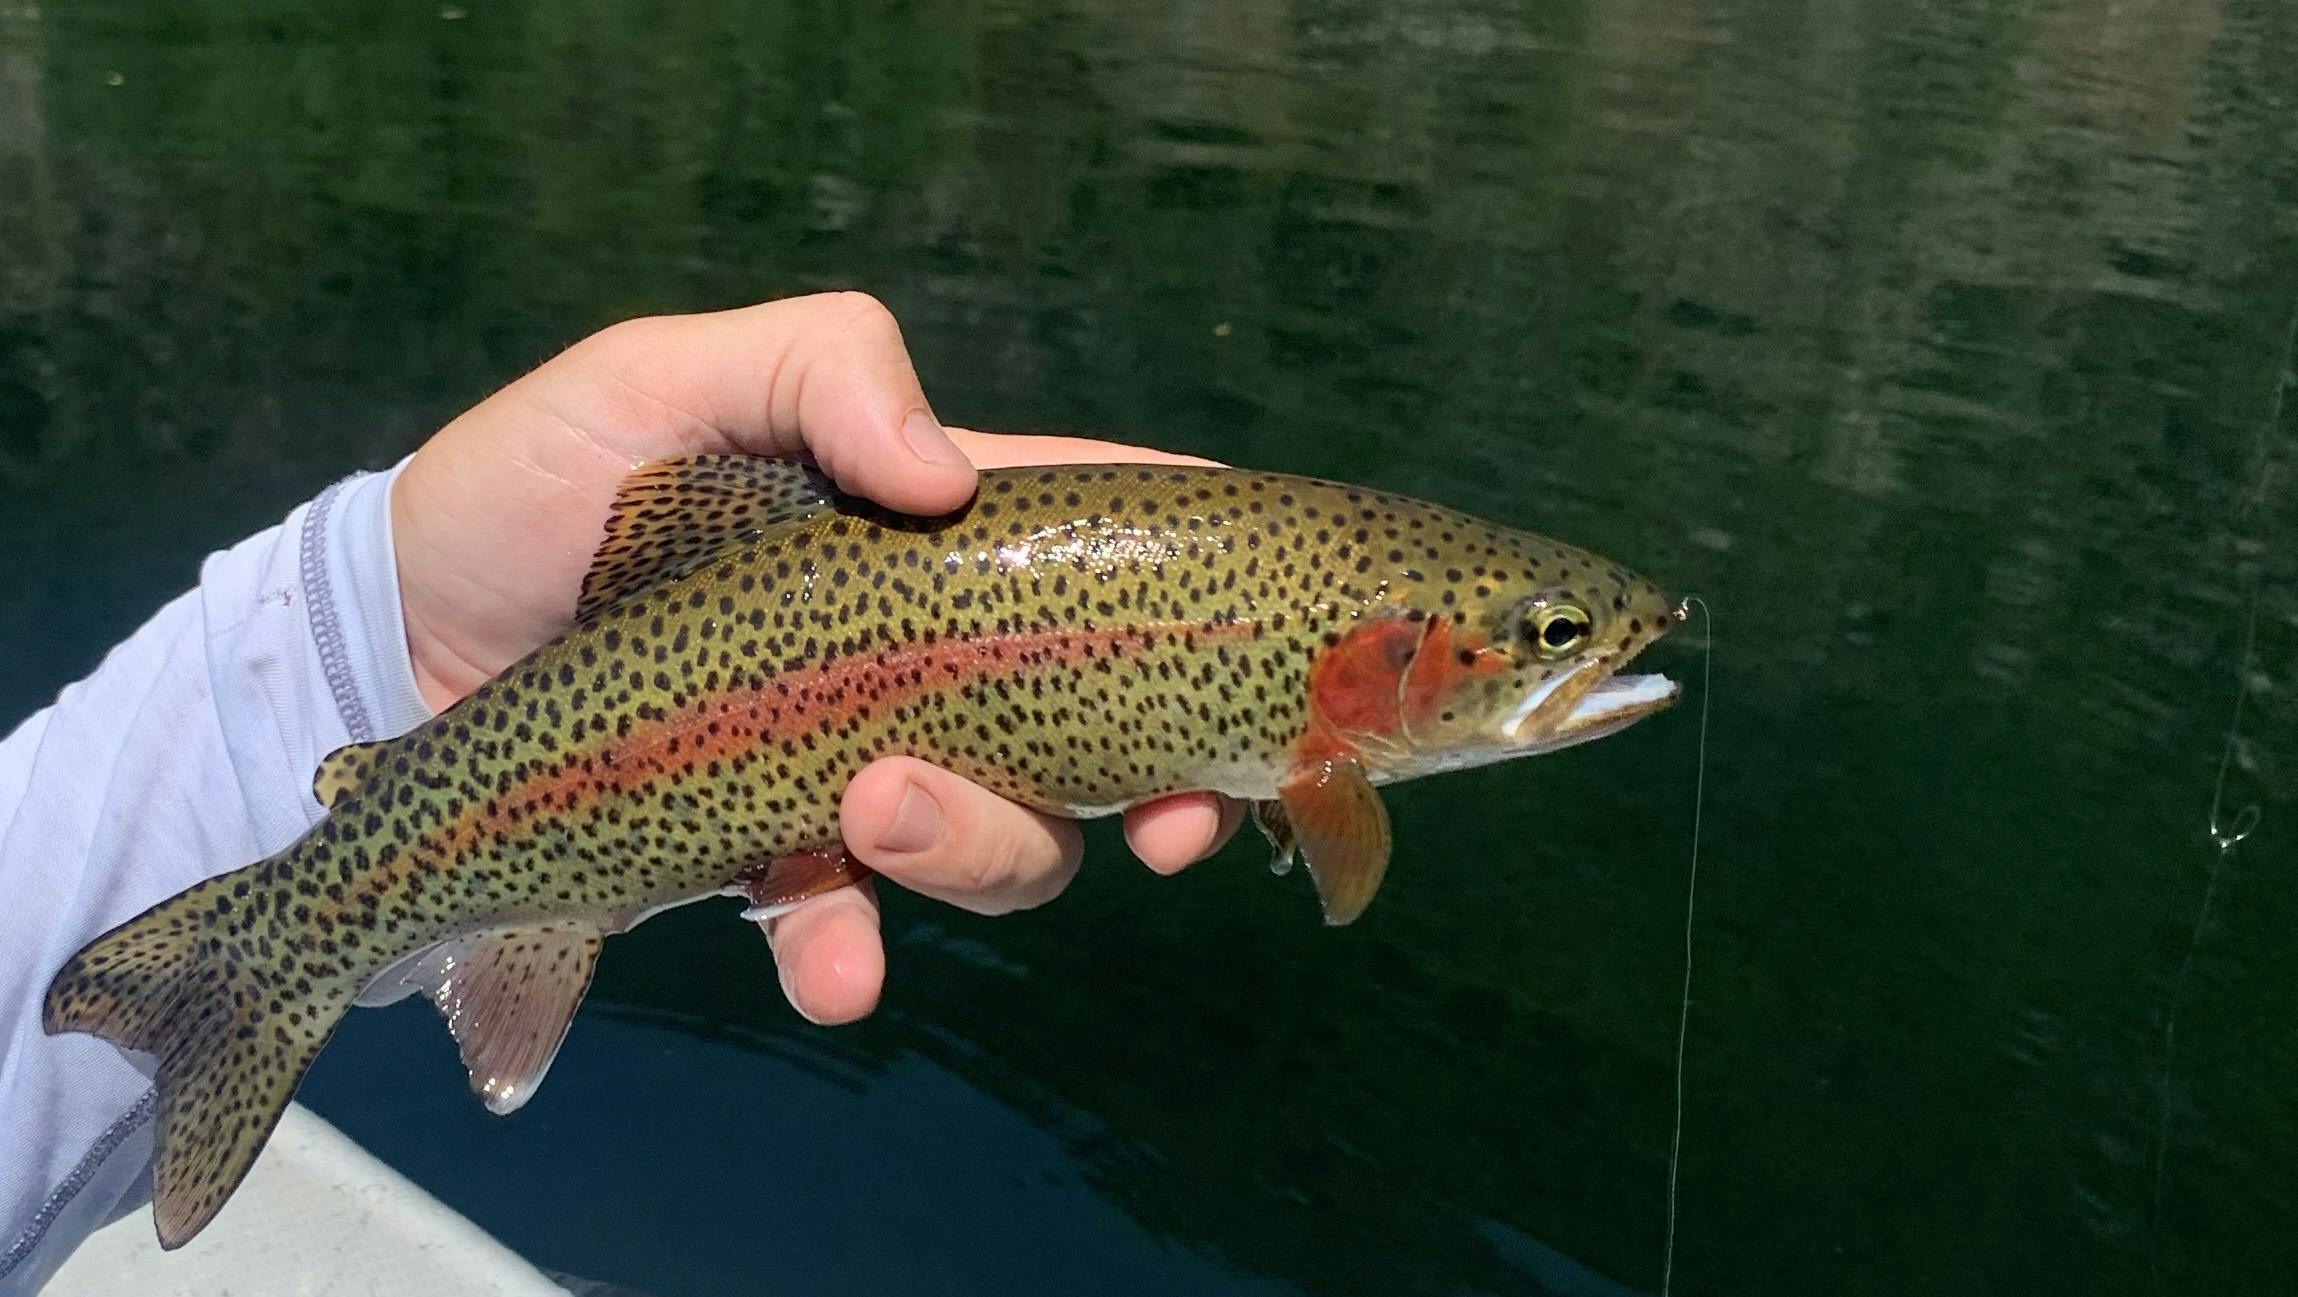 A hand holding a trout above water.